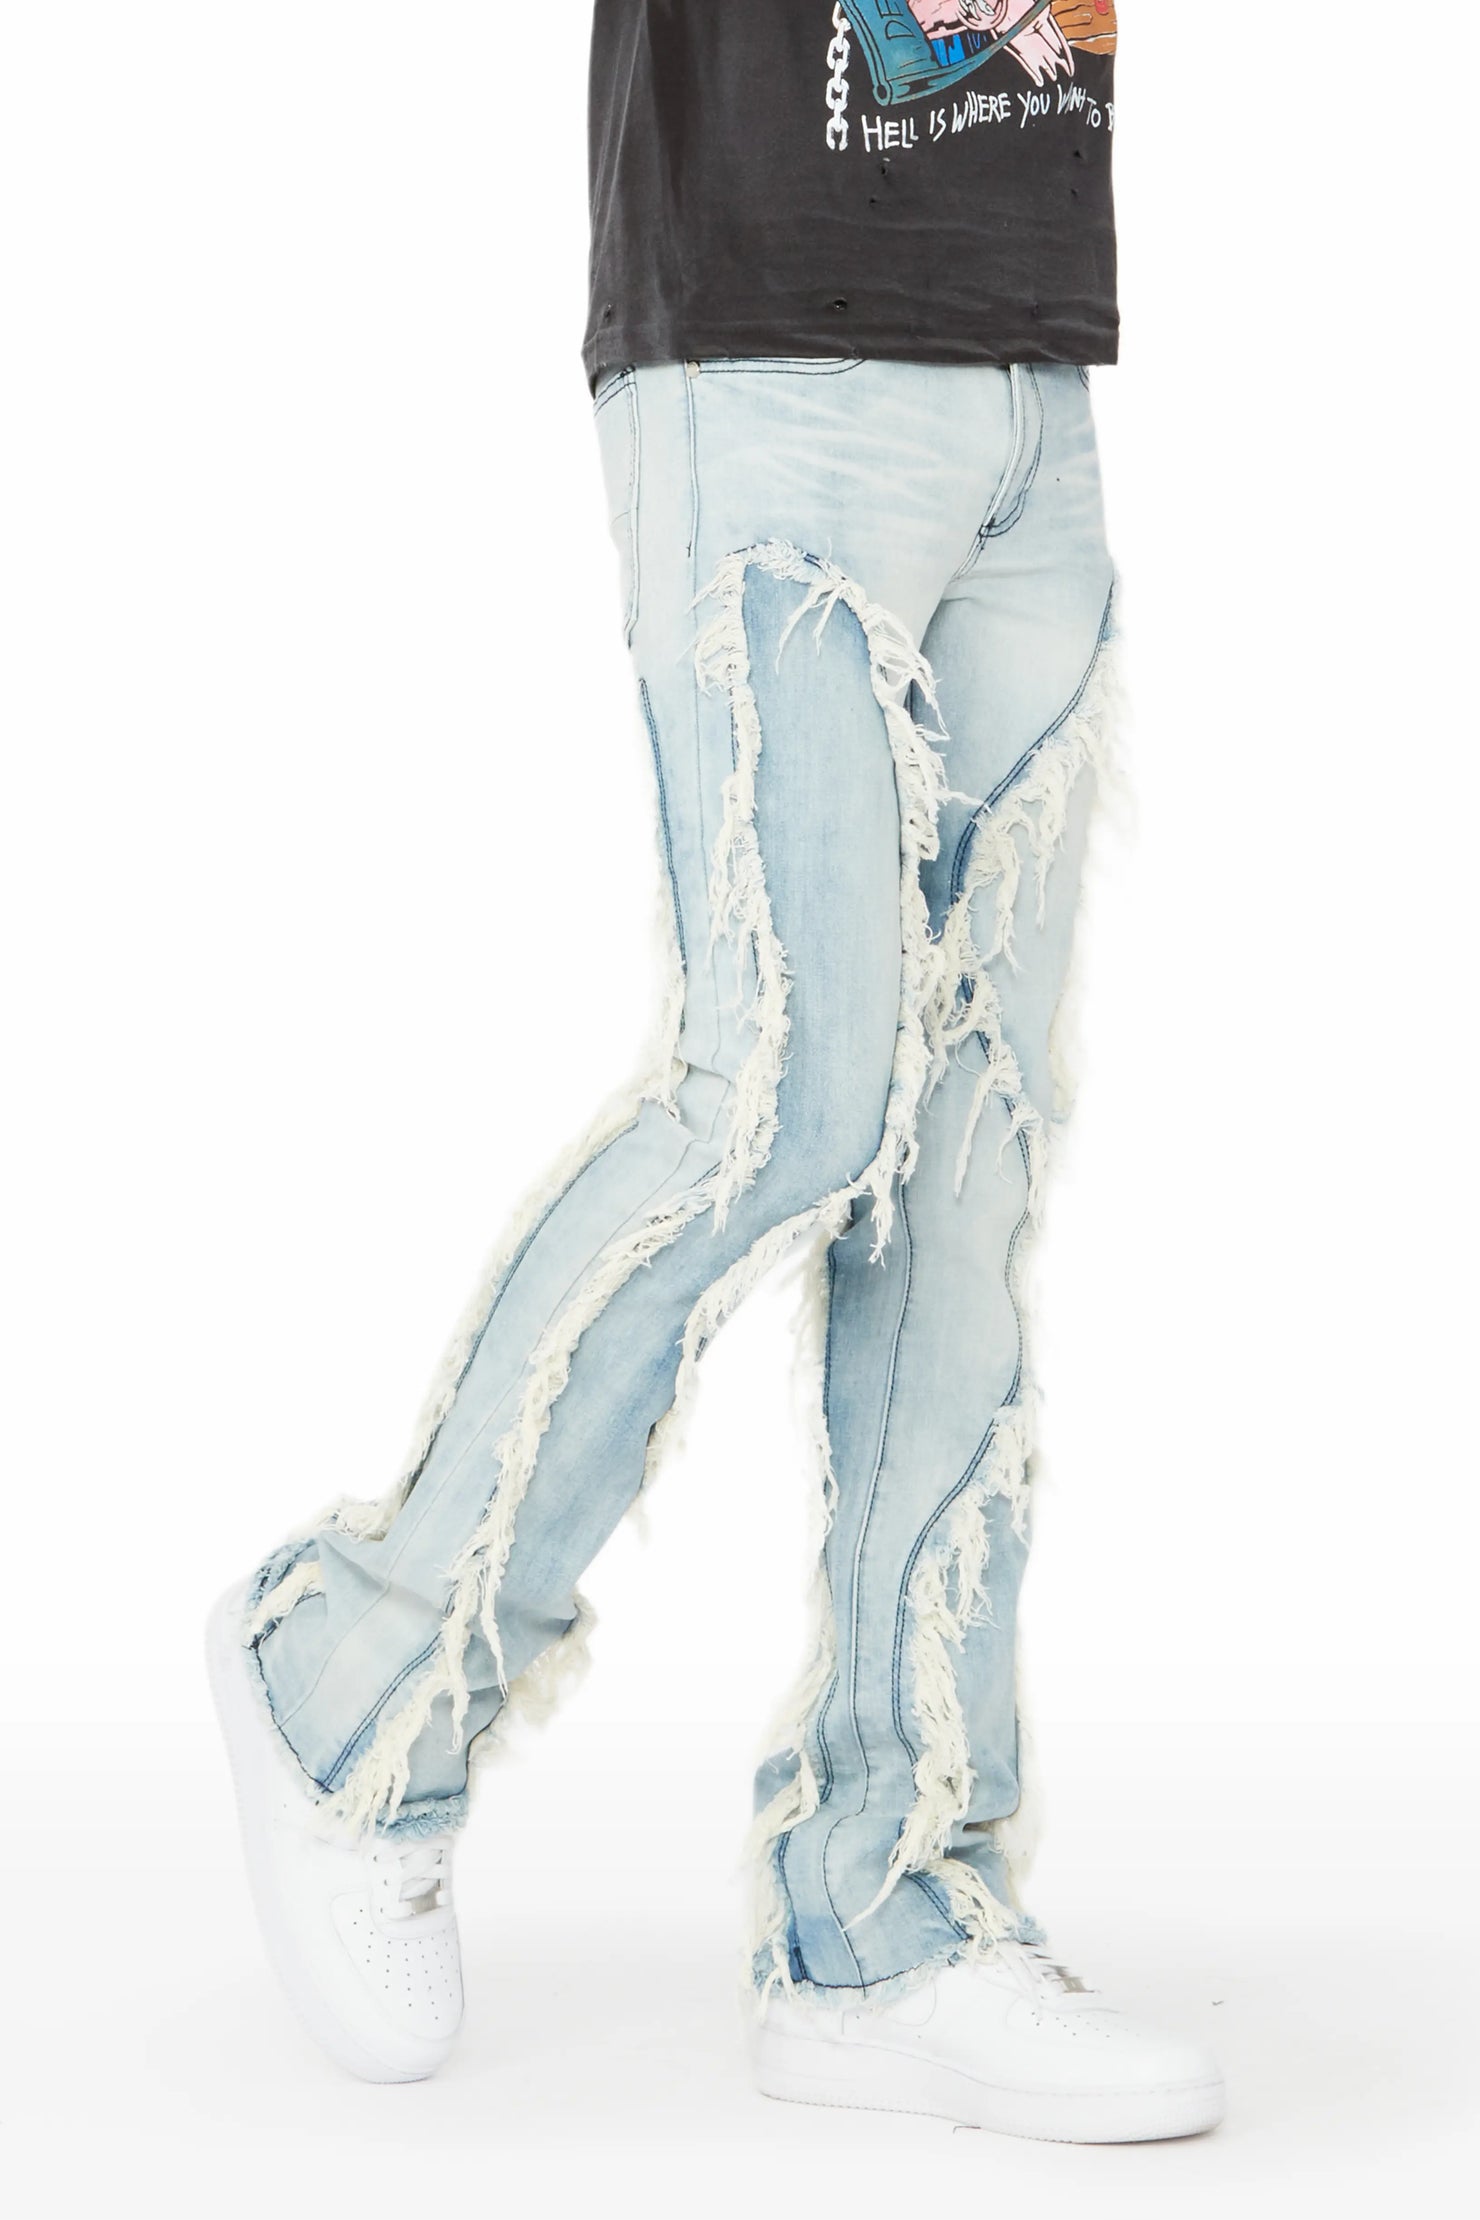 Tristan Blue Stacked Flare Jean